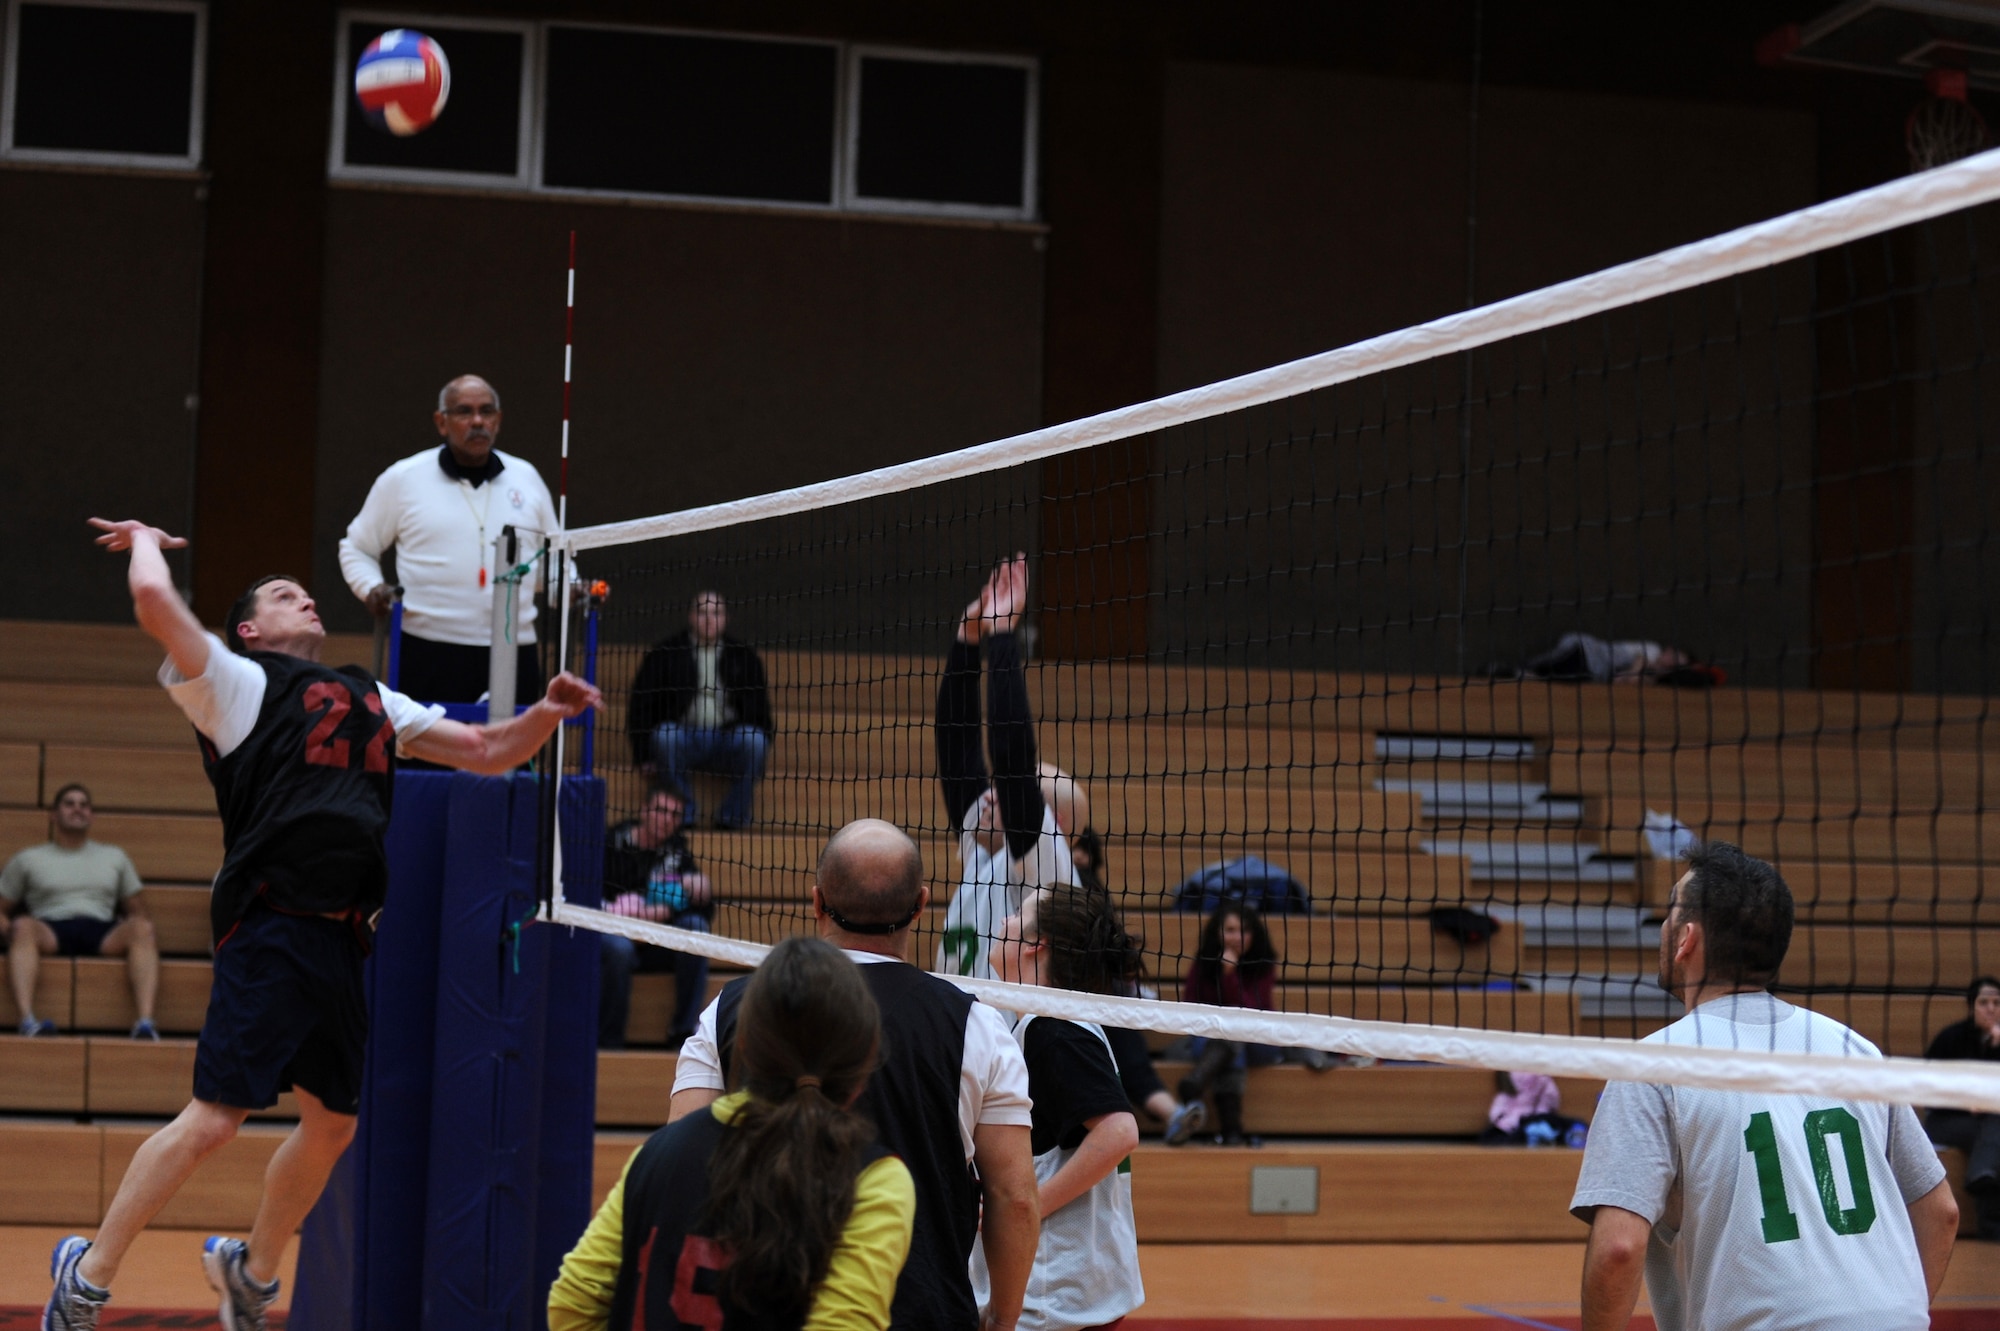 SPANGDAHLEM AIR BASE, Germany – Kenneth Phillips, 52nd Force Support Squadron, number 22, jumps to spike the volleyball over 606th Air Control Squadron defenders during an intramural volleyball game at the Skelton Memorial Fitness Center here Feb. 15. FSS defeated ACS in two sets, 25-16 and 26-24.  This match kicked off the intramural volleyball season, and games will be played Monday – Thursday beginning at 6:30 p.m. at the fitness center. (U.S. Air Force photo by Airman 1st Class Matthew B. Fredericks/Released)